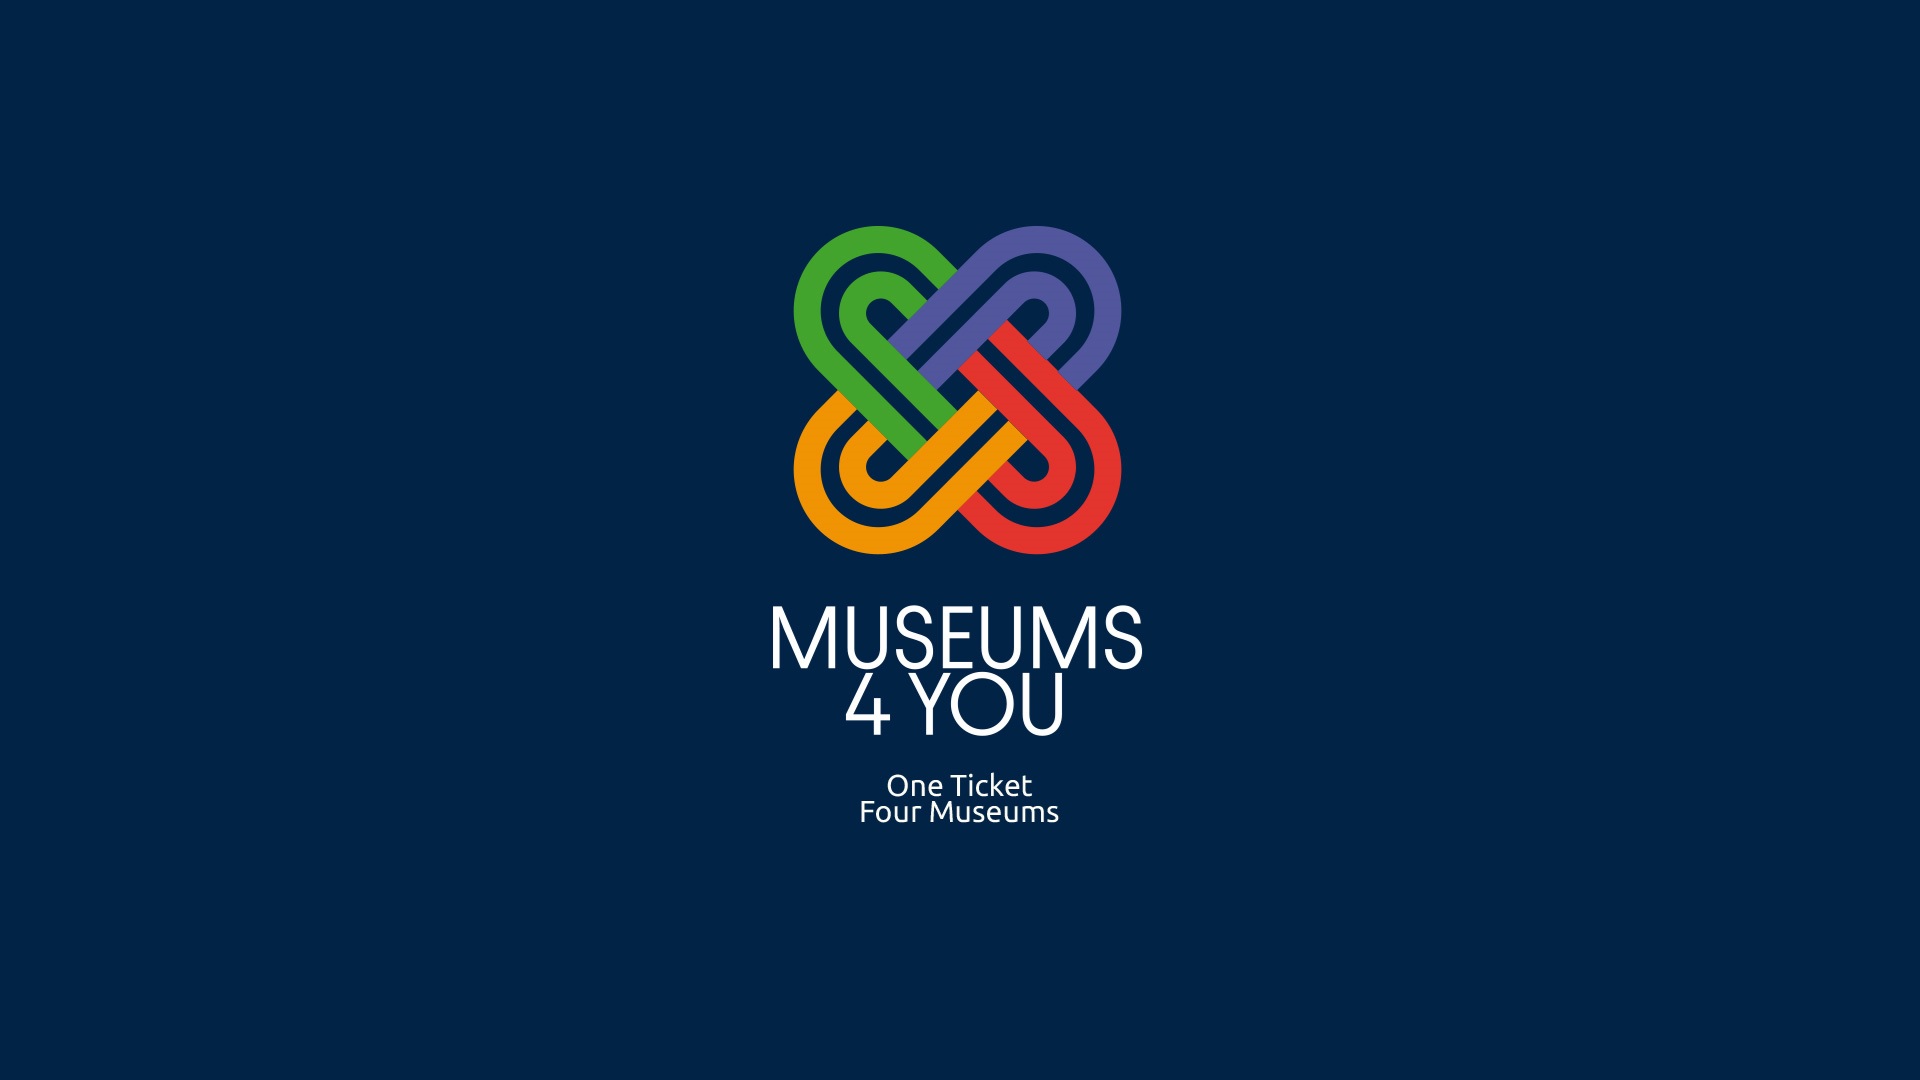 MUSEUMS 4 YOU - One ticket, four museums